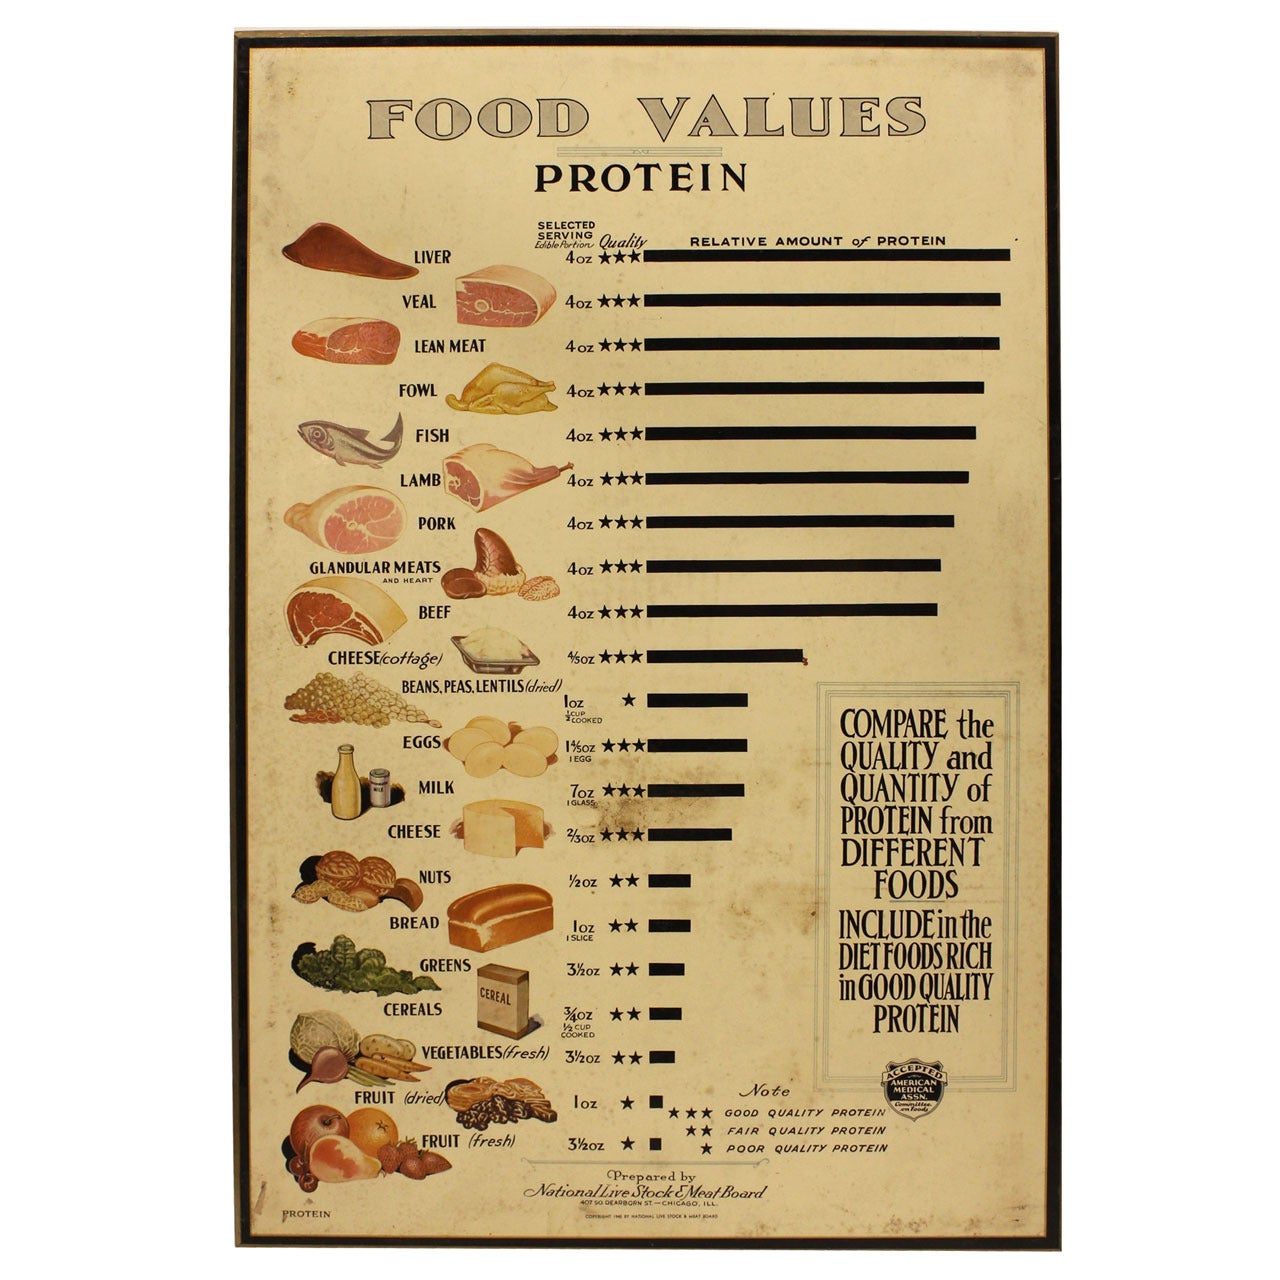 Vintage Food Values Protein Poster By National Live Stock & Meat Board